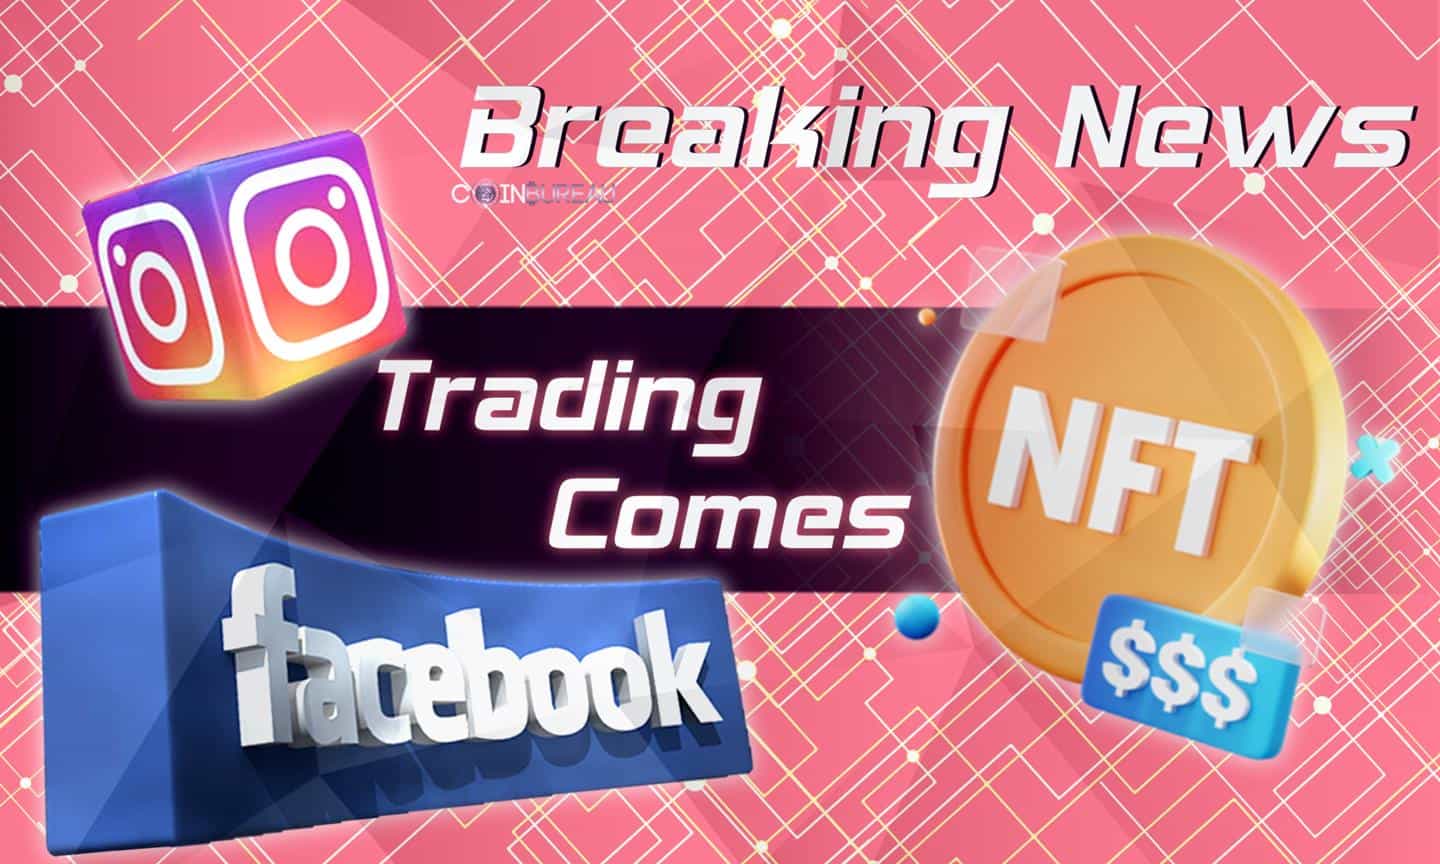 NFT Trading Comes to Facebook and Instagram: Report